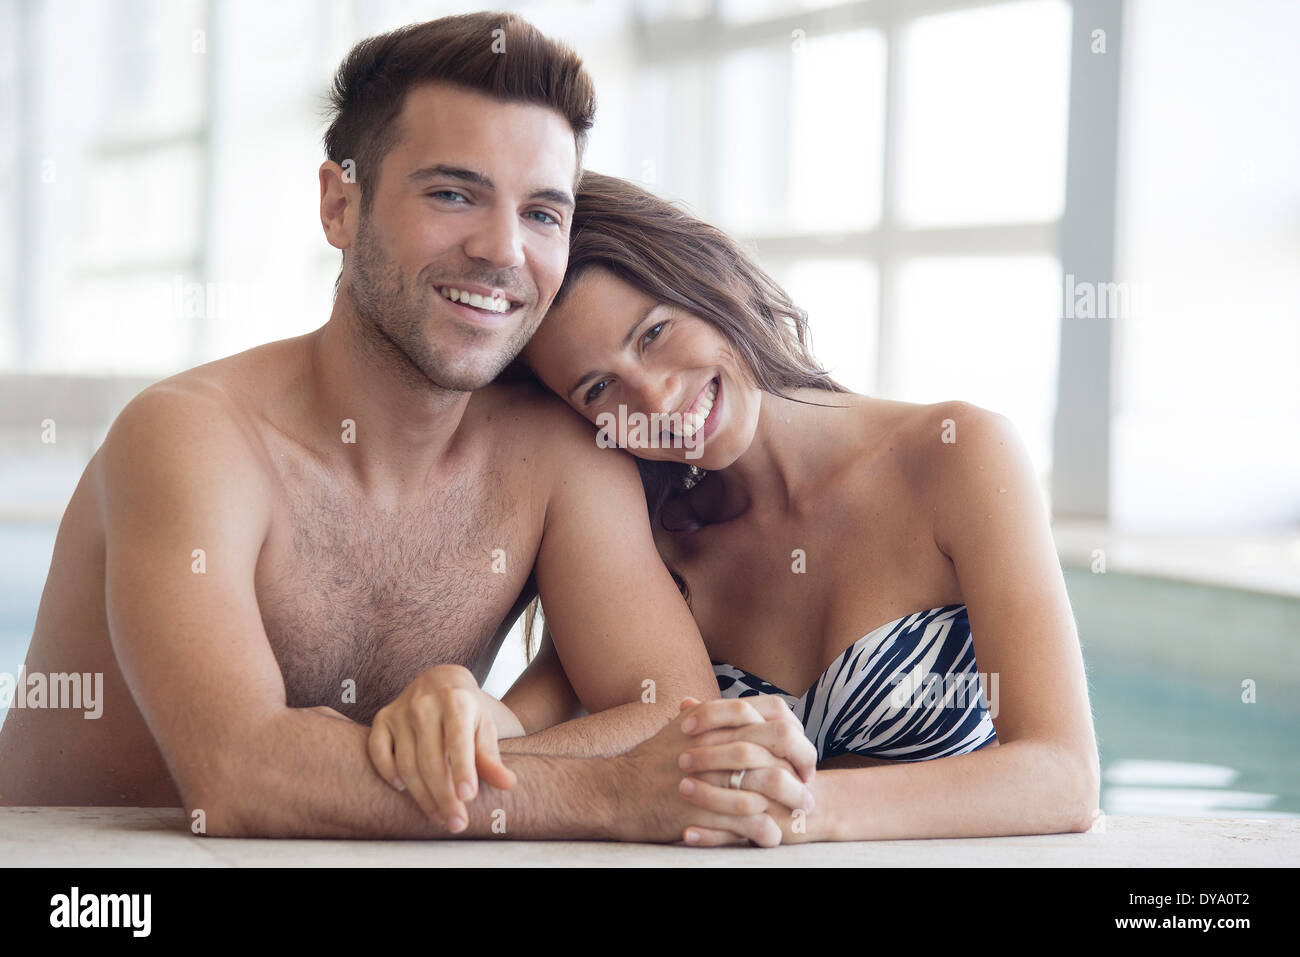 Young couple in pool together, portrait Stock Photo